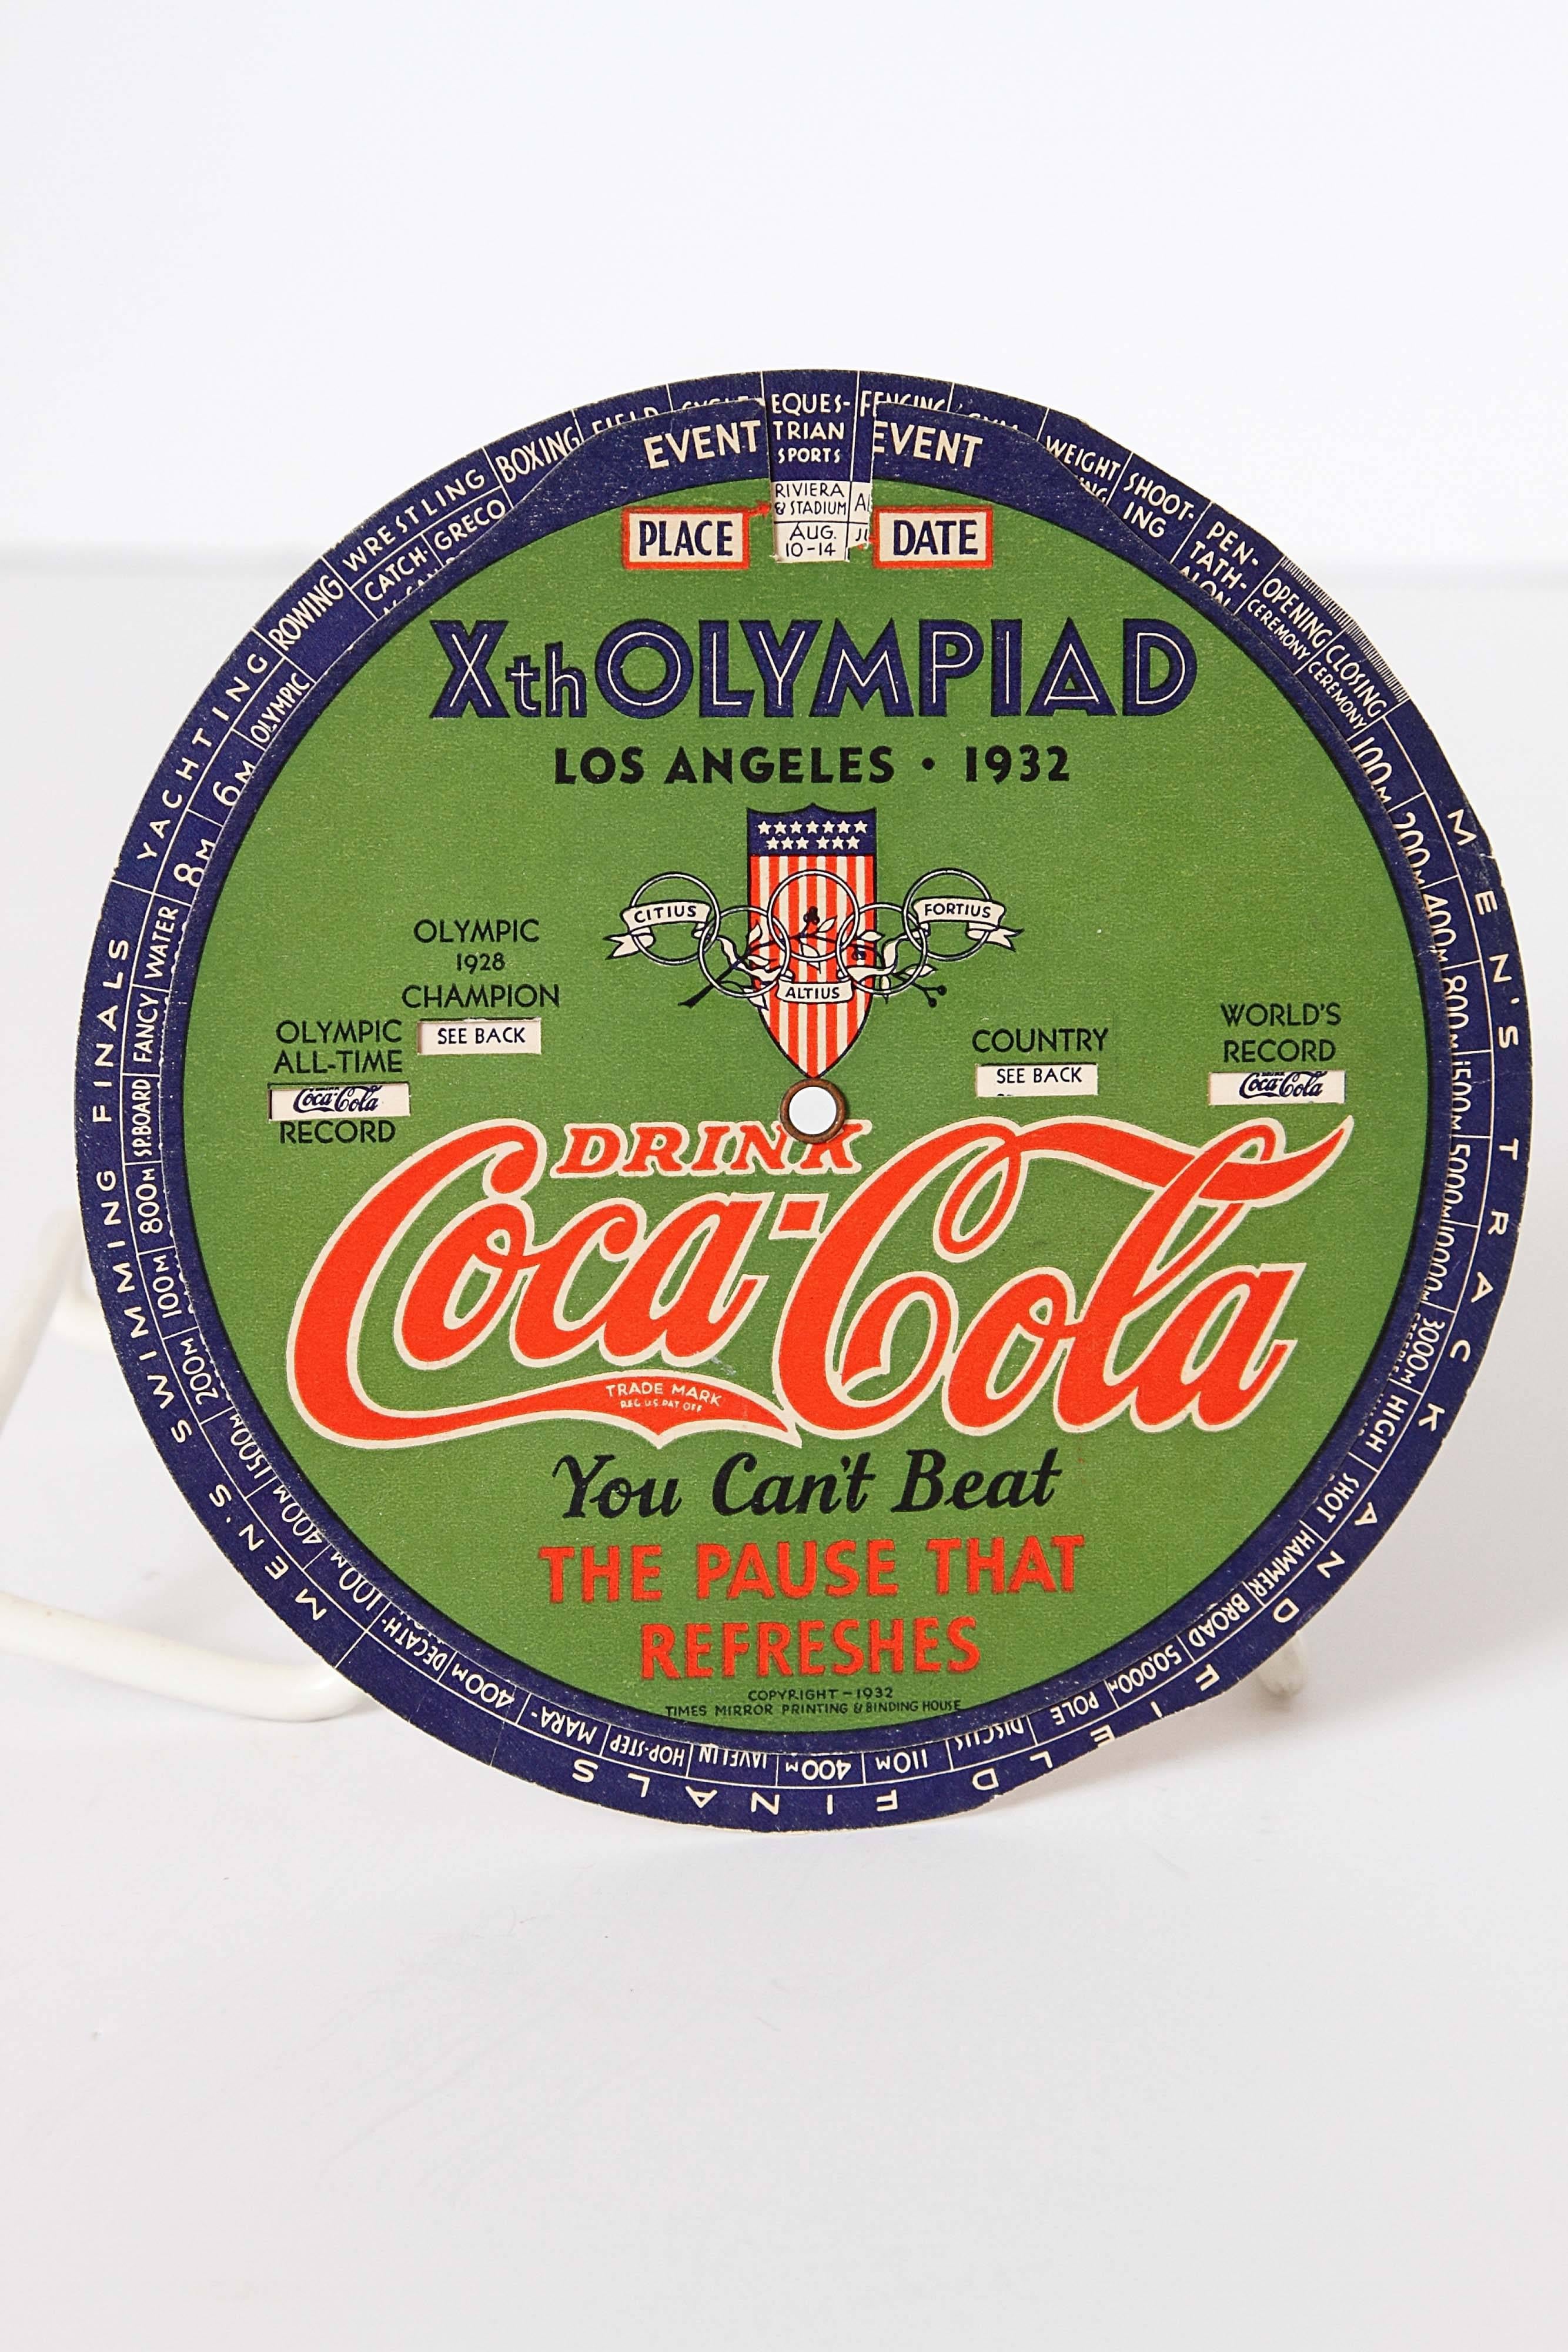 Vintage Art Deco Machine Age Cubist Olympic Games Medallions / Ephemera Coke In Good Condition For Sale In Dallas, TX